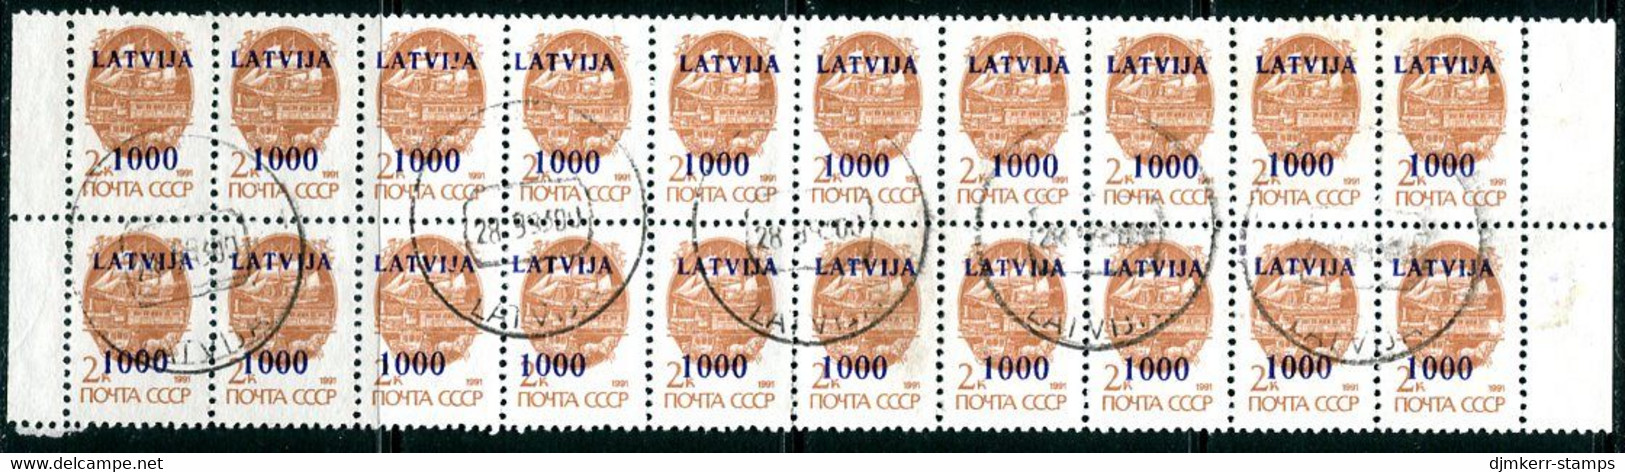 LATVIA 1991 Provisional Surcharges I 1000 K. Block Of 20 Used.  Michel 316 - Letland